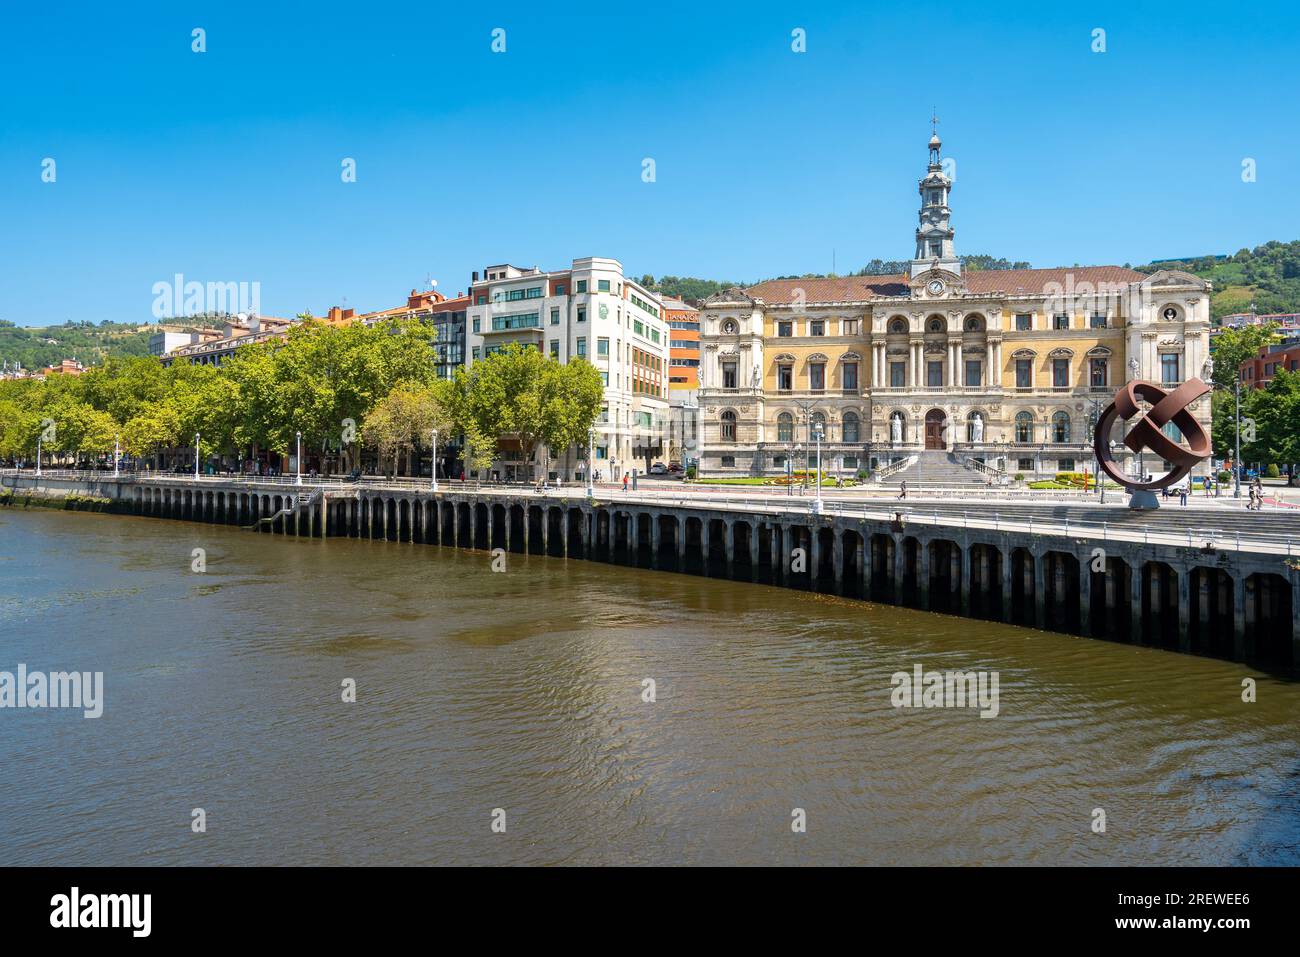 Beautiful City Hall building of the Bilbao city, built in Baroque style. In front of the building is the river Nervion. People passing. Stock Photo